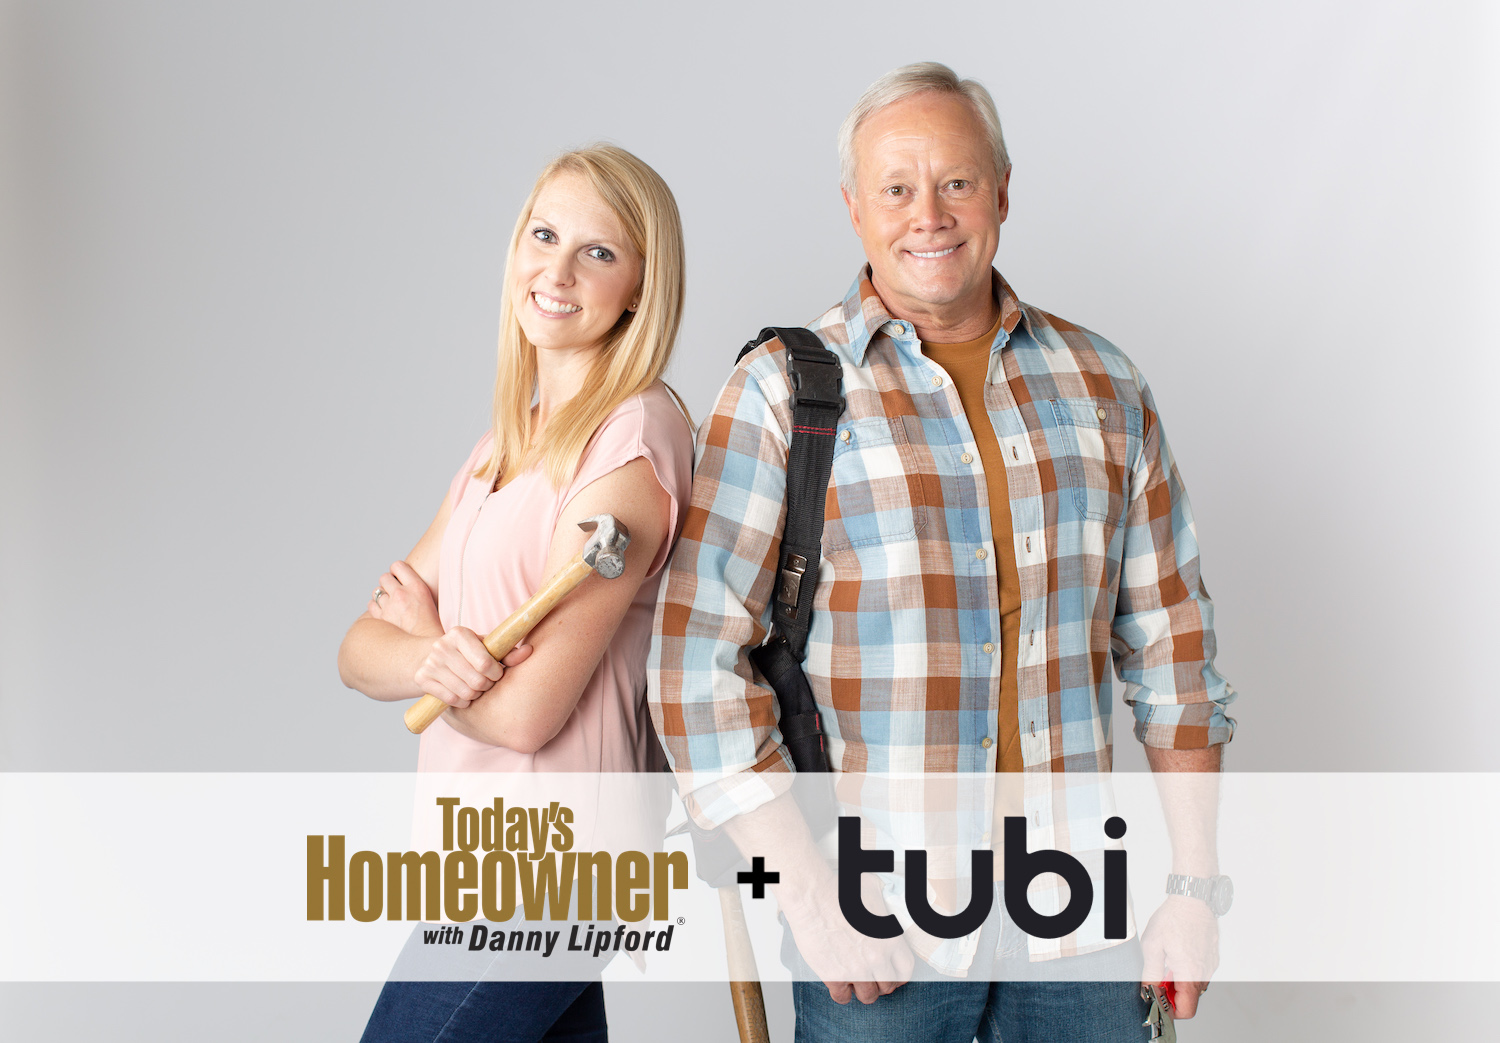 Hosts of "Today's Homeowner" TV, Danny Lipford and Chelsea Lipford Wolf, are excited to announce their new streaming partnership with Tubi.